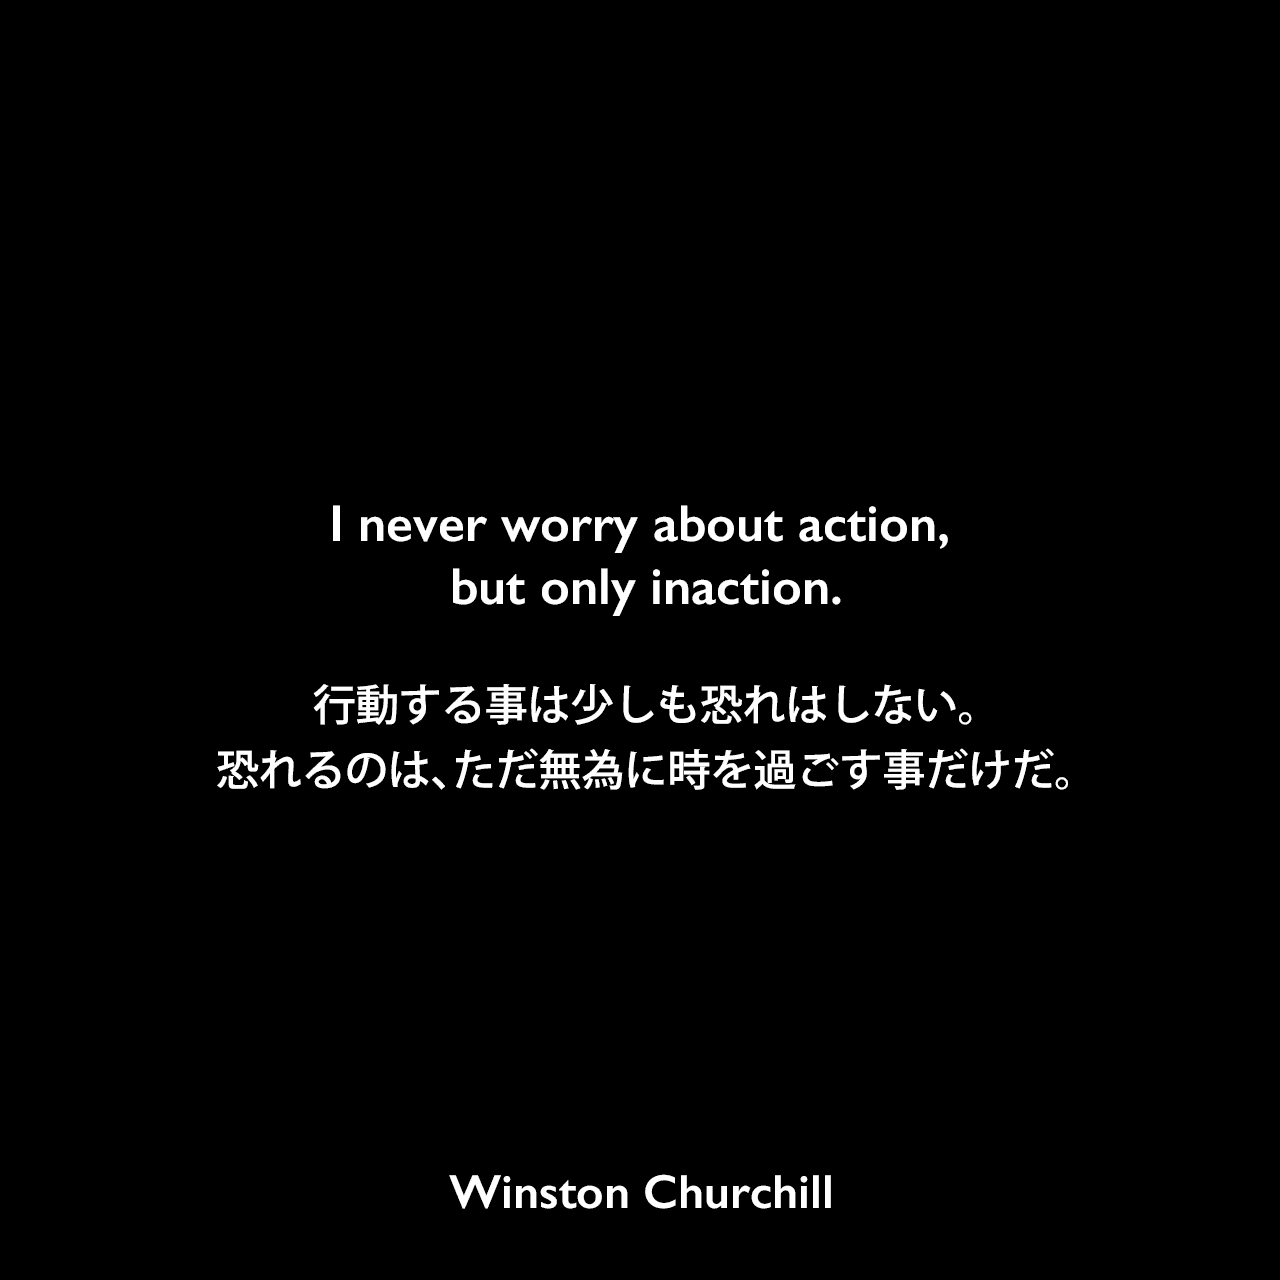 I never worry about action, but only inaction.行動する事は少しも恐れはしない。恐れるのは、ただ無為に時を過ごす事だけだ。